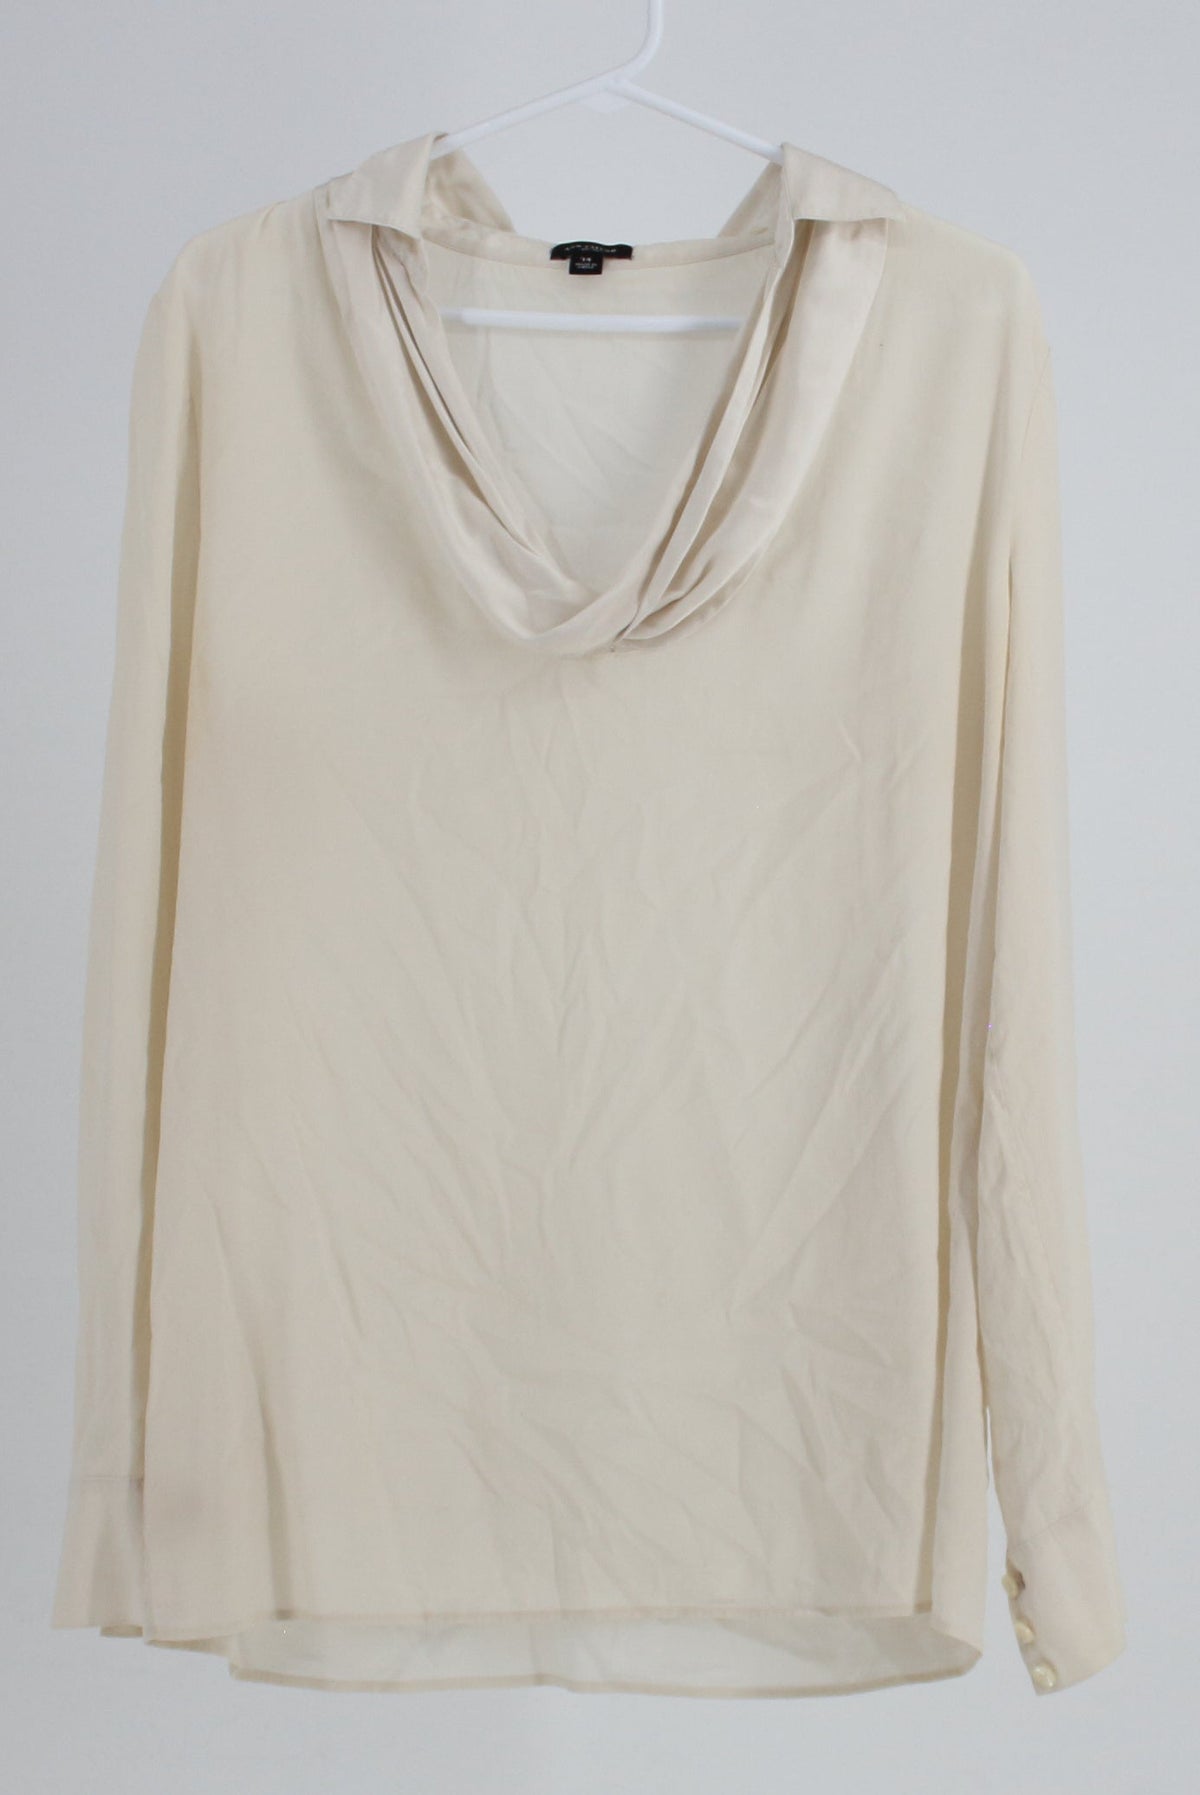 Ann Taylor Cream Silk Top with Drapping Neck